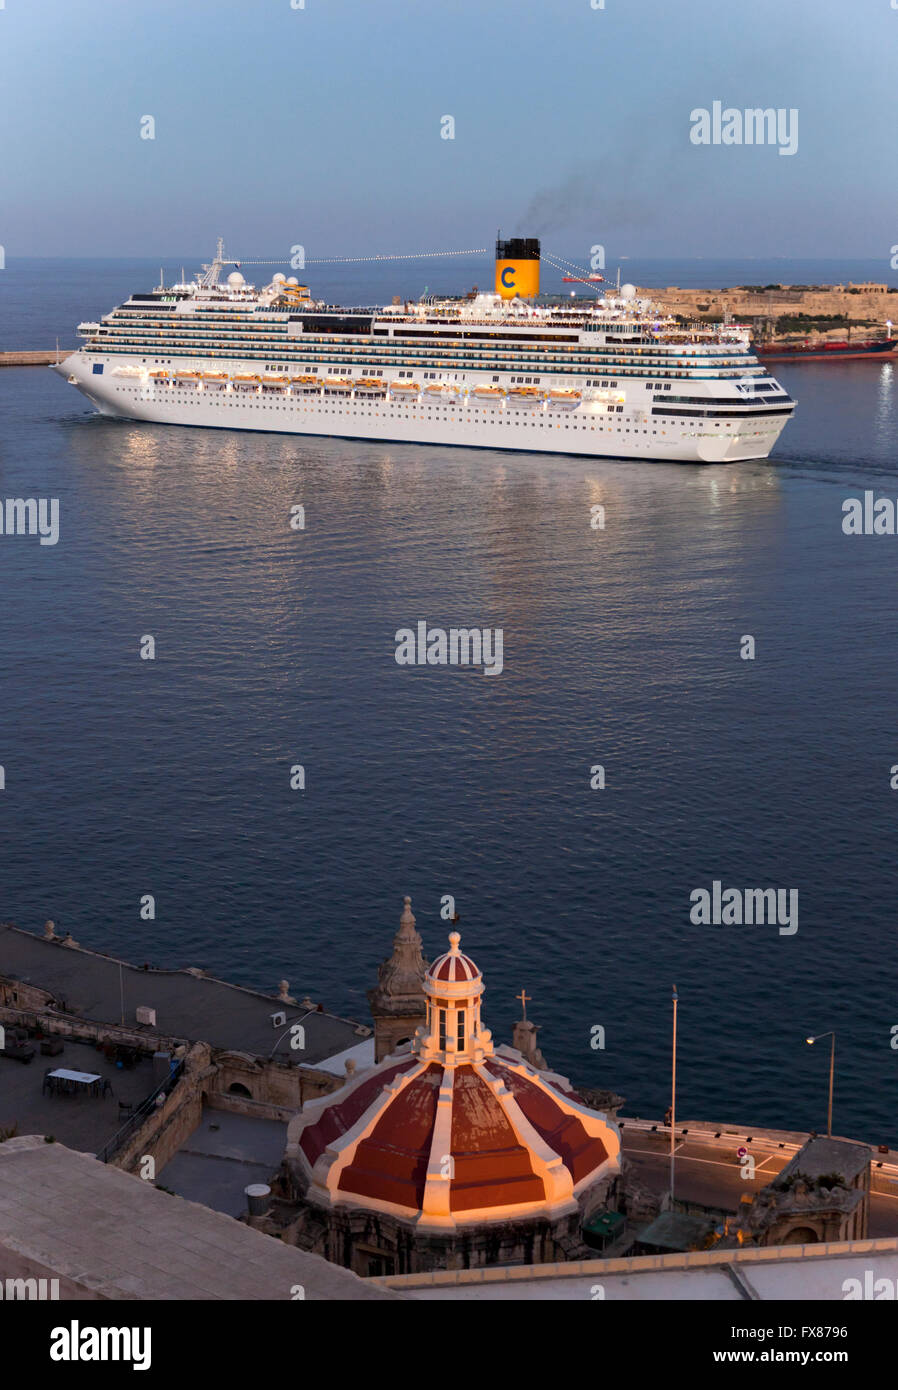 A cruise ship sailing out of the Grand Harbour in Malta past the dome of a Catholic church built on the shore of Valletta. Stock Photo